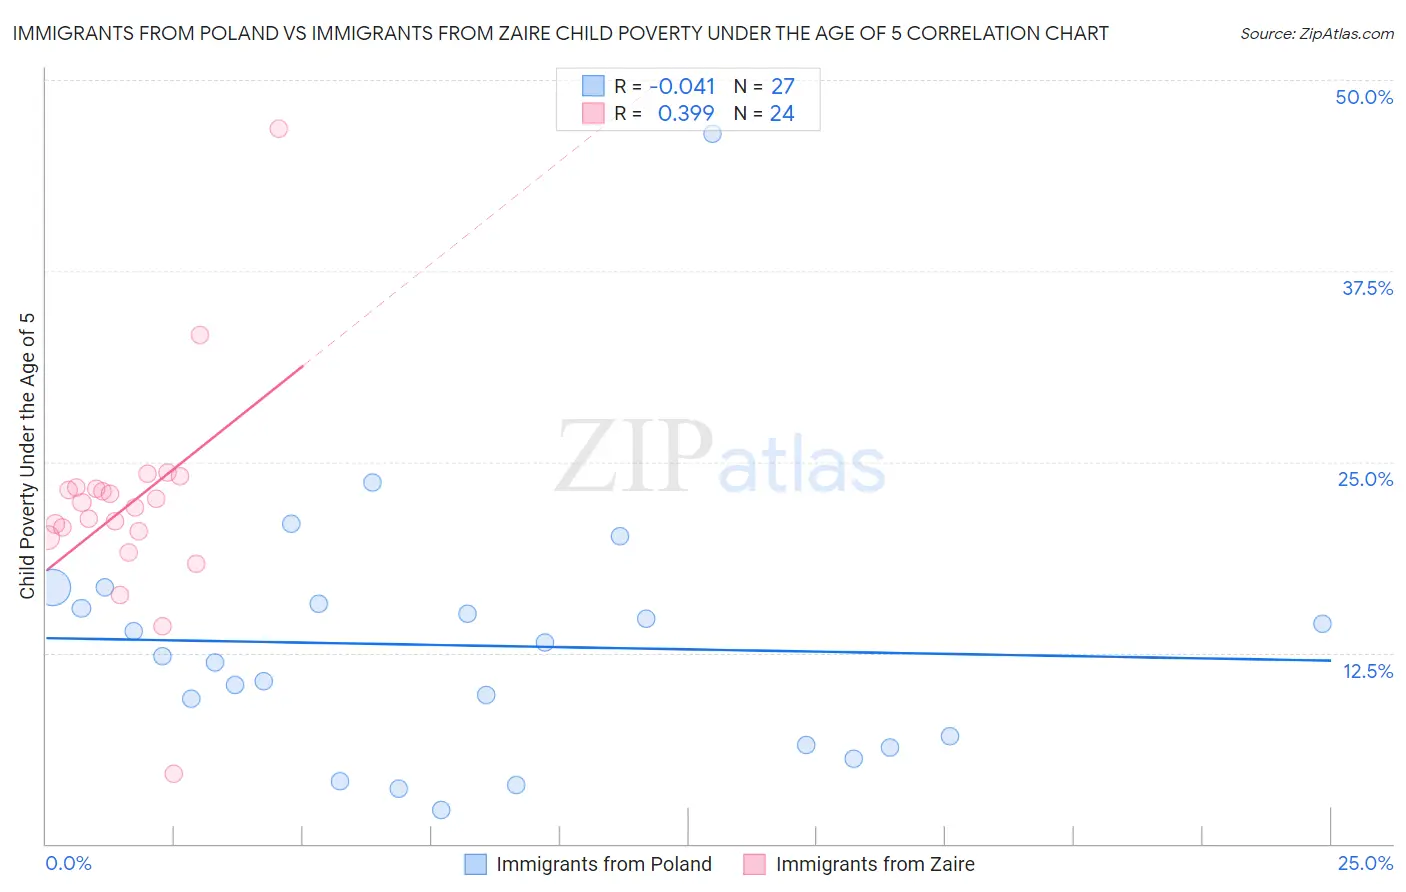 Immigrants from Poland vs Immigrants from Zaire Child Poverty Under the Age of 5